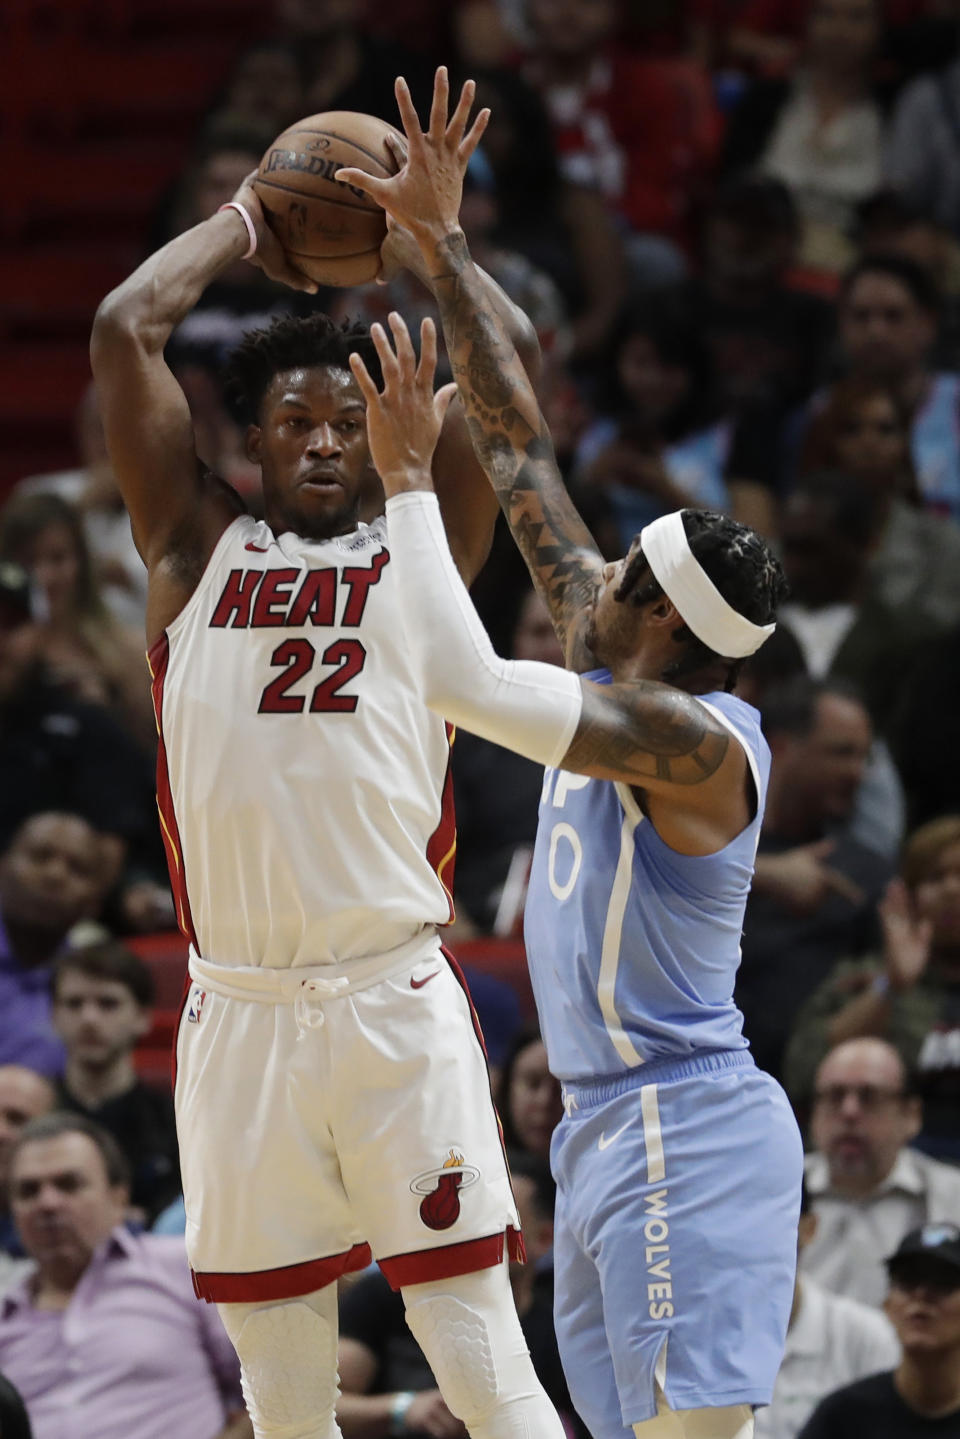 Miami Heat forward Jimmy Butler (22) passes past Minnesota Timberwolves guard D'Angelo Russell (0) during the first half of an NBA basketball game, Wednesday, Feb. 26, 2020, in Miami. (AP Photo/Wilfredo Lee)